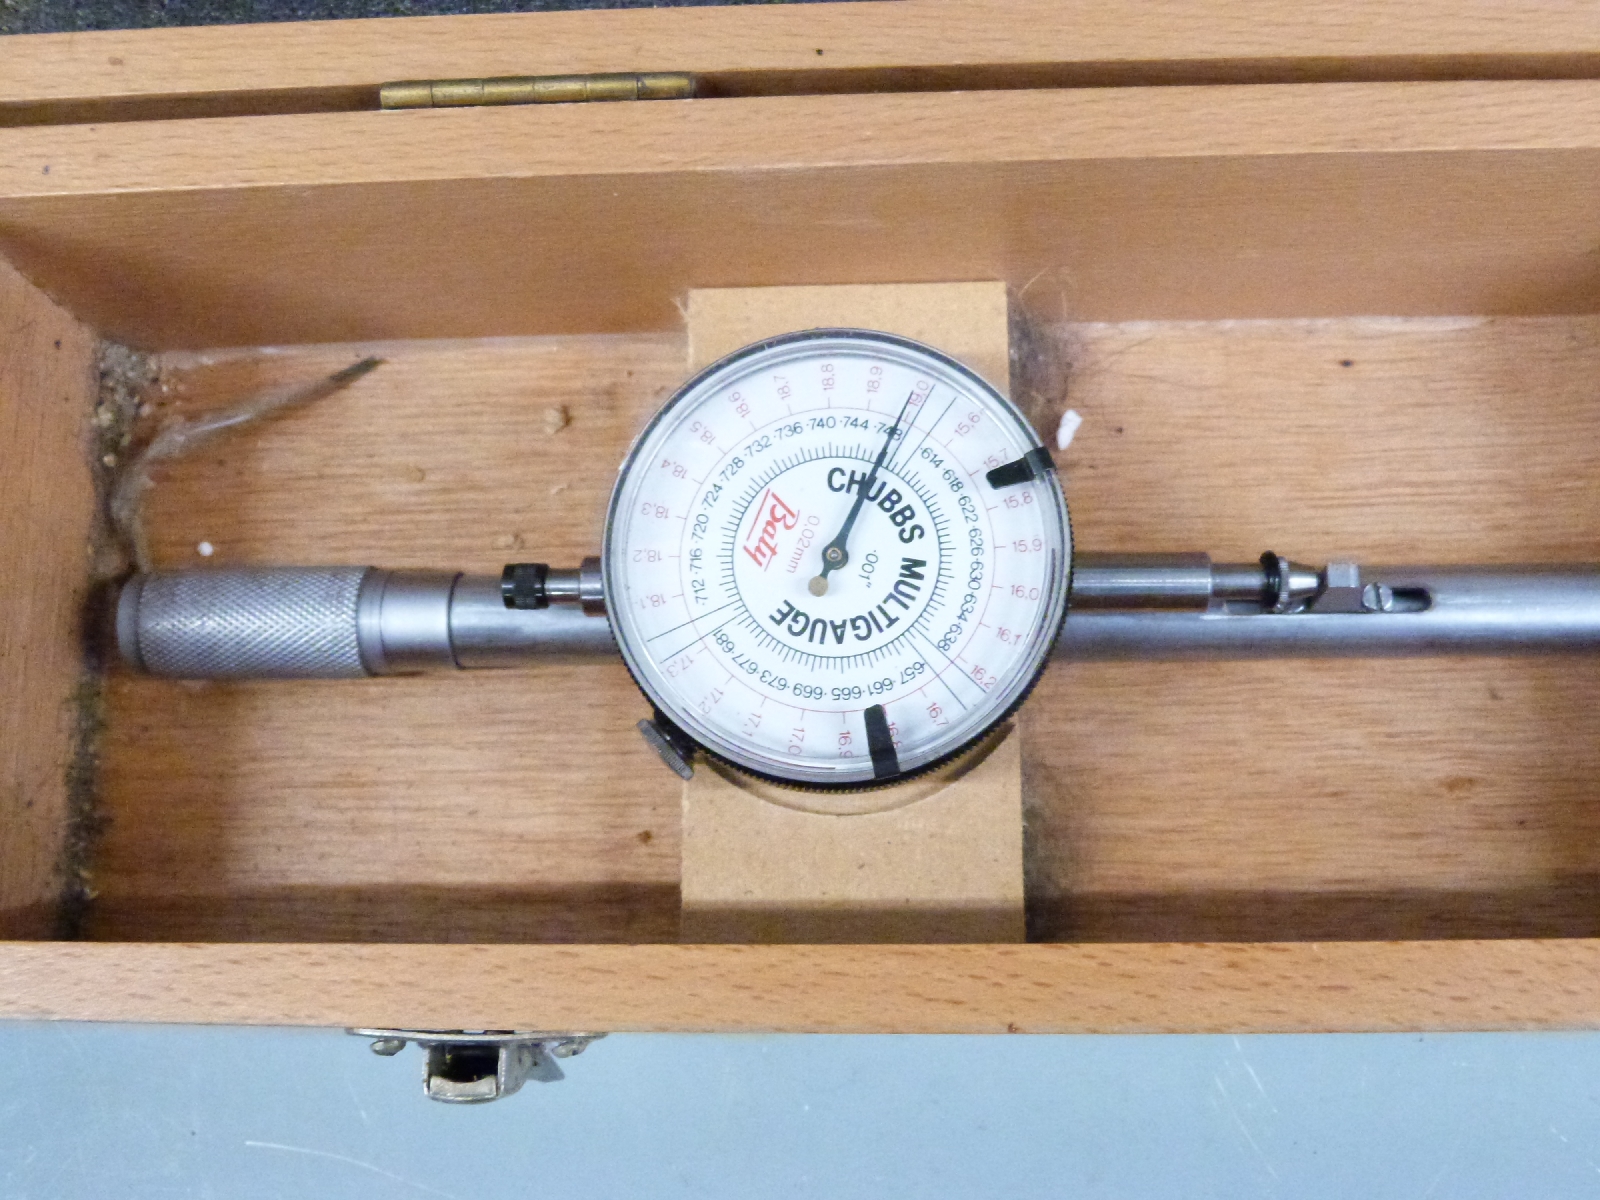 Baty Chubbs Multigauge bore gauge, in fitted wooden case. - Image 2 of 3